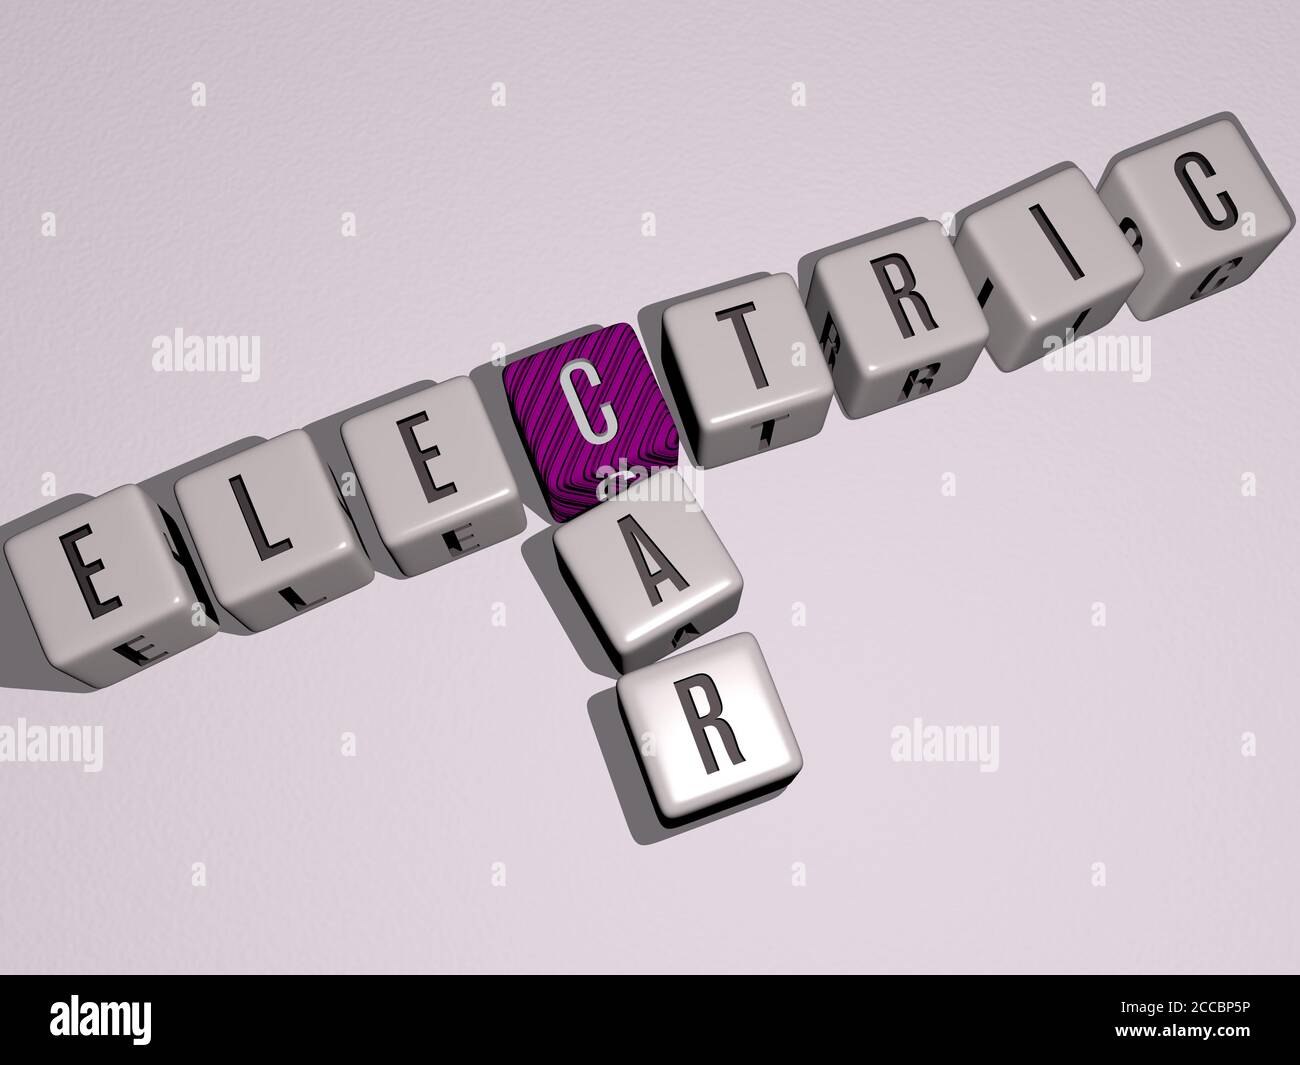 electric car crossword by cubic dice letters, 3D illustration Stock